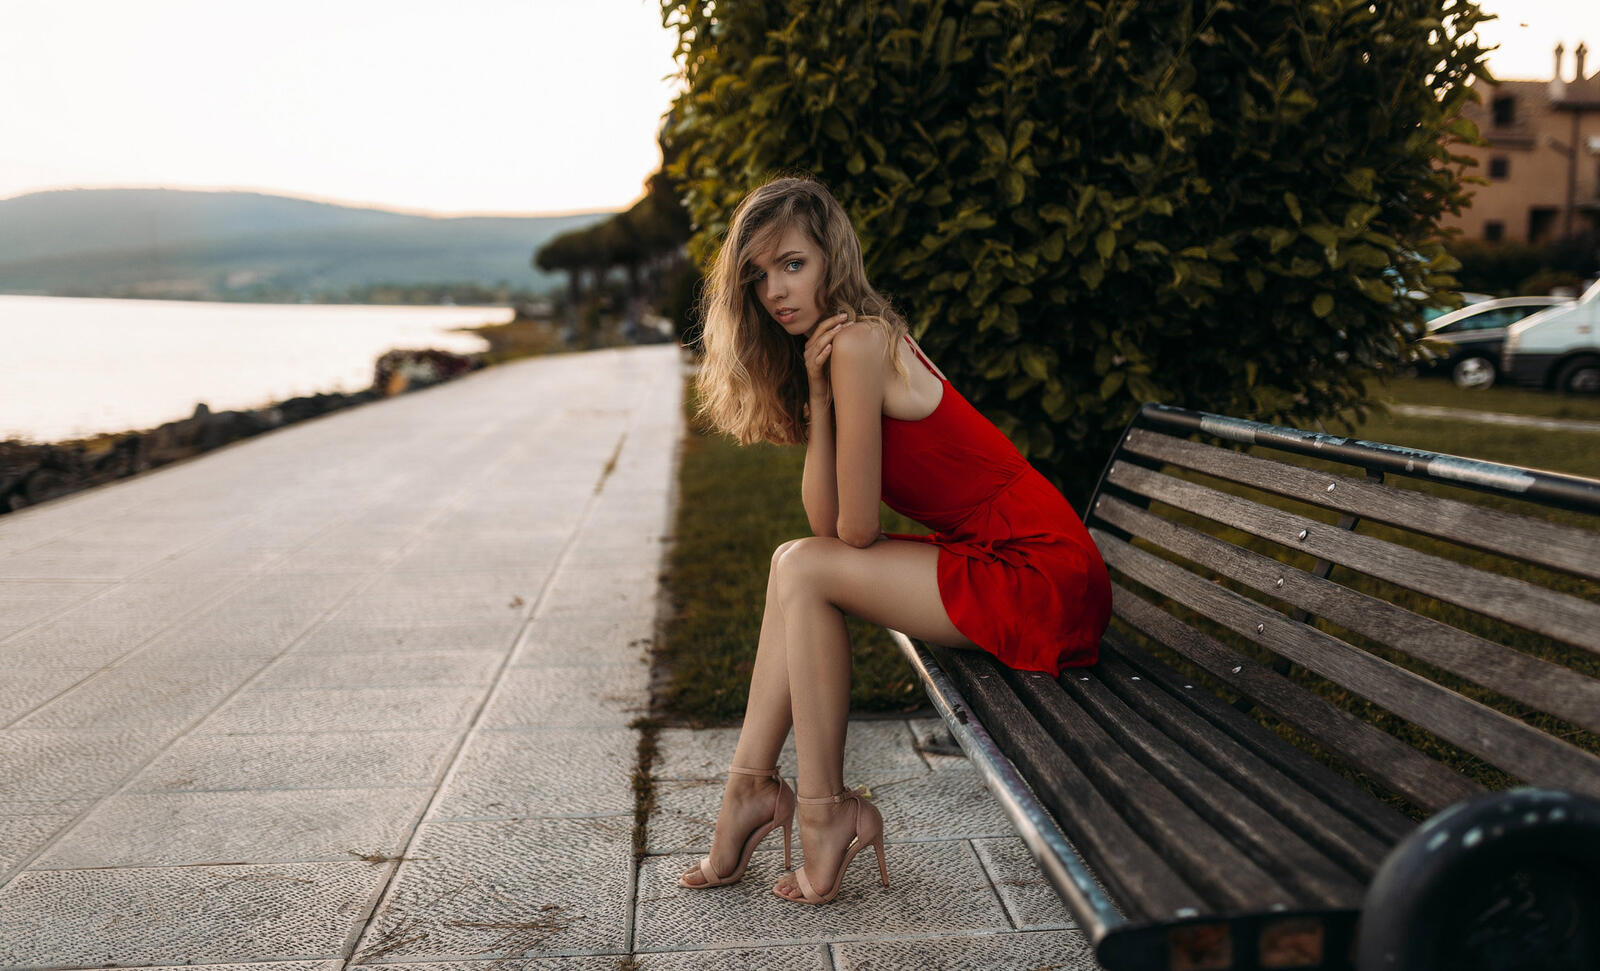 Free photo A beautiful model in a red dress sits on a bench